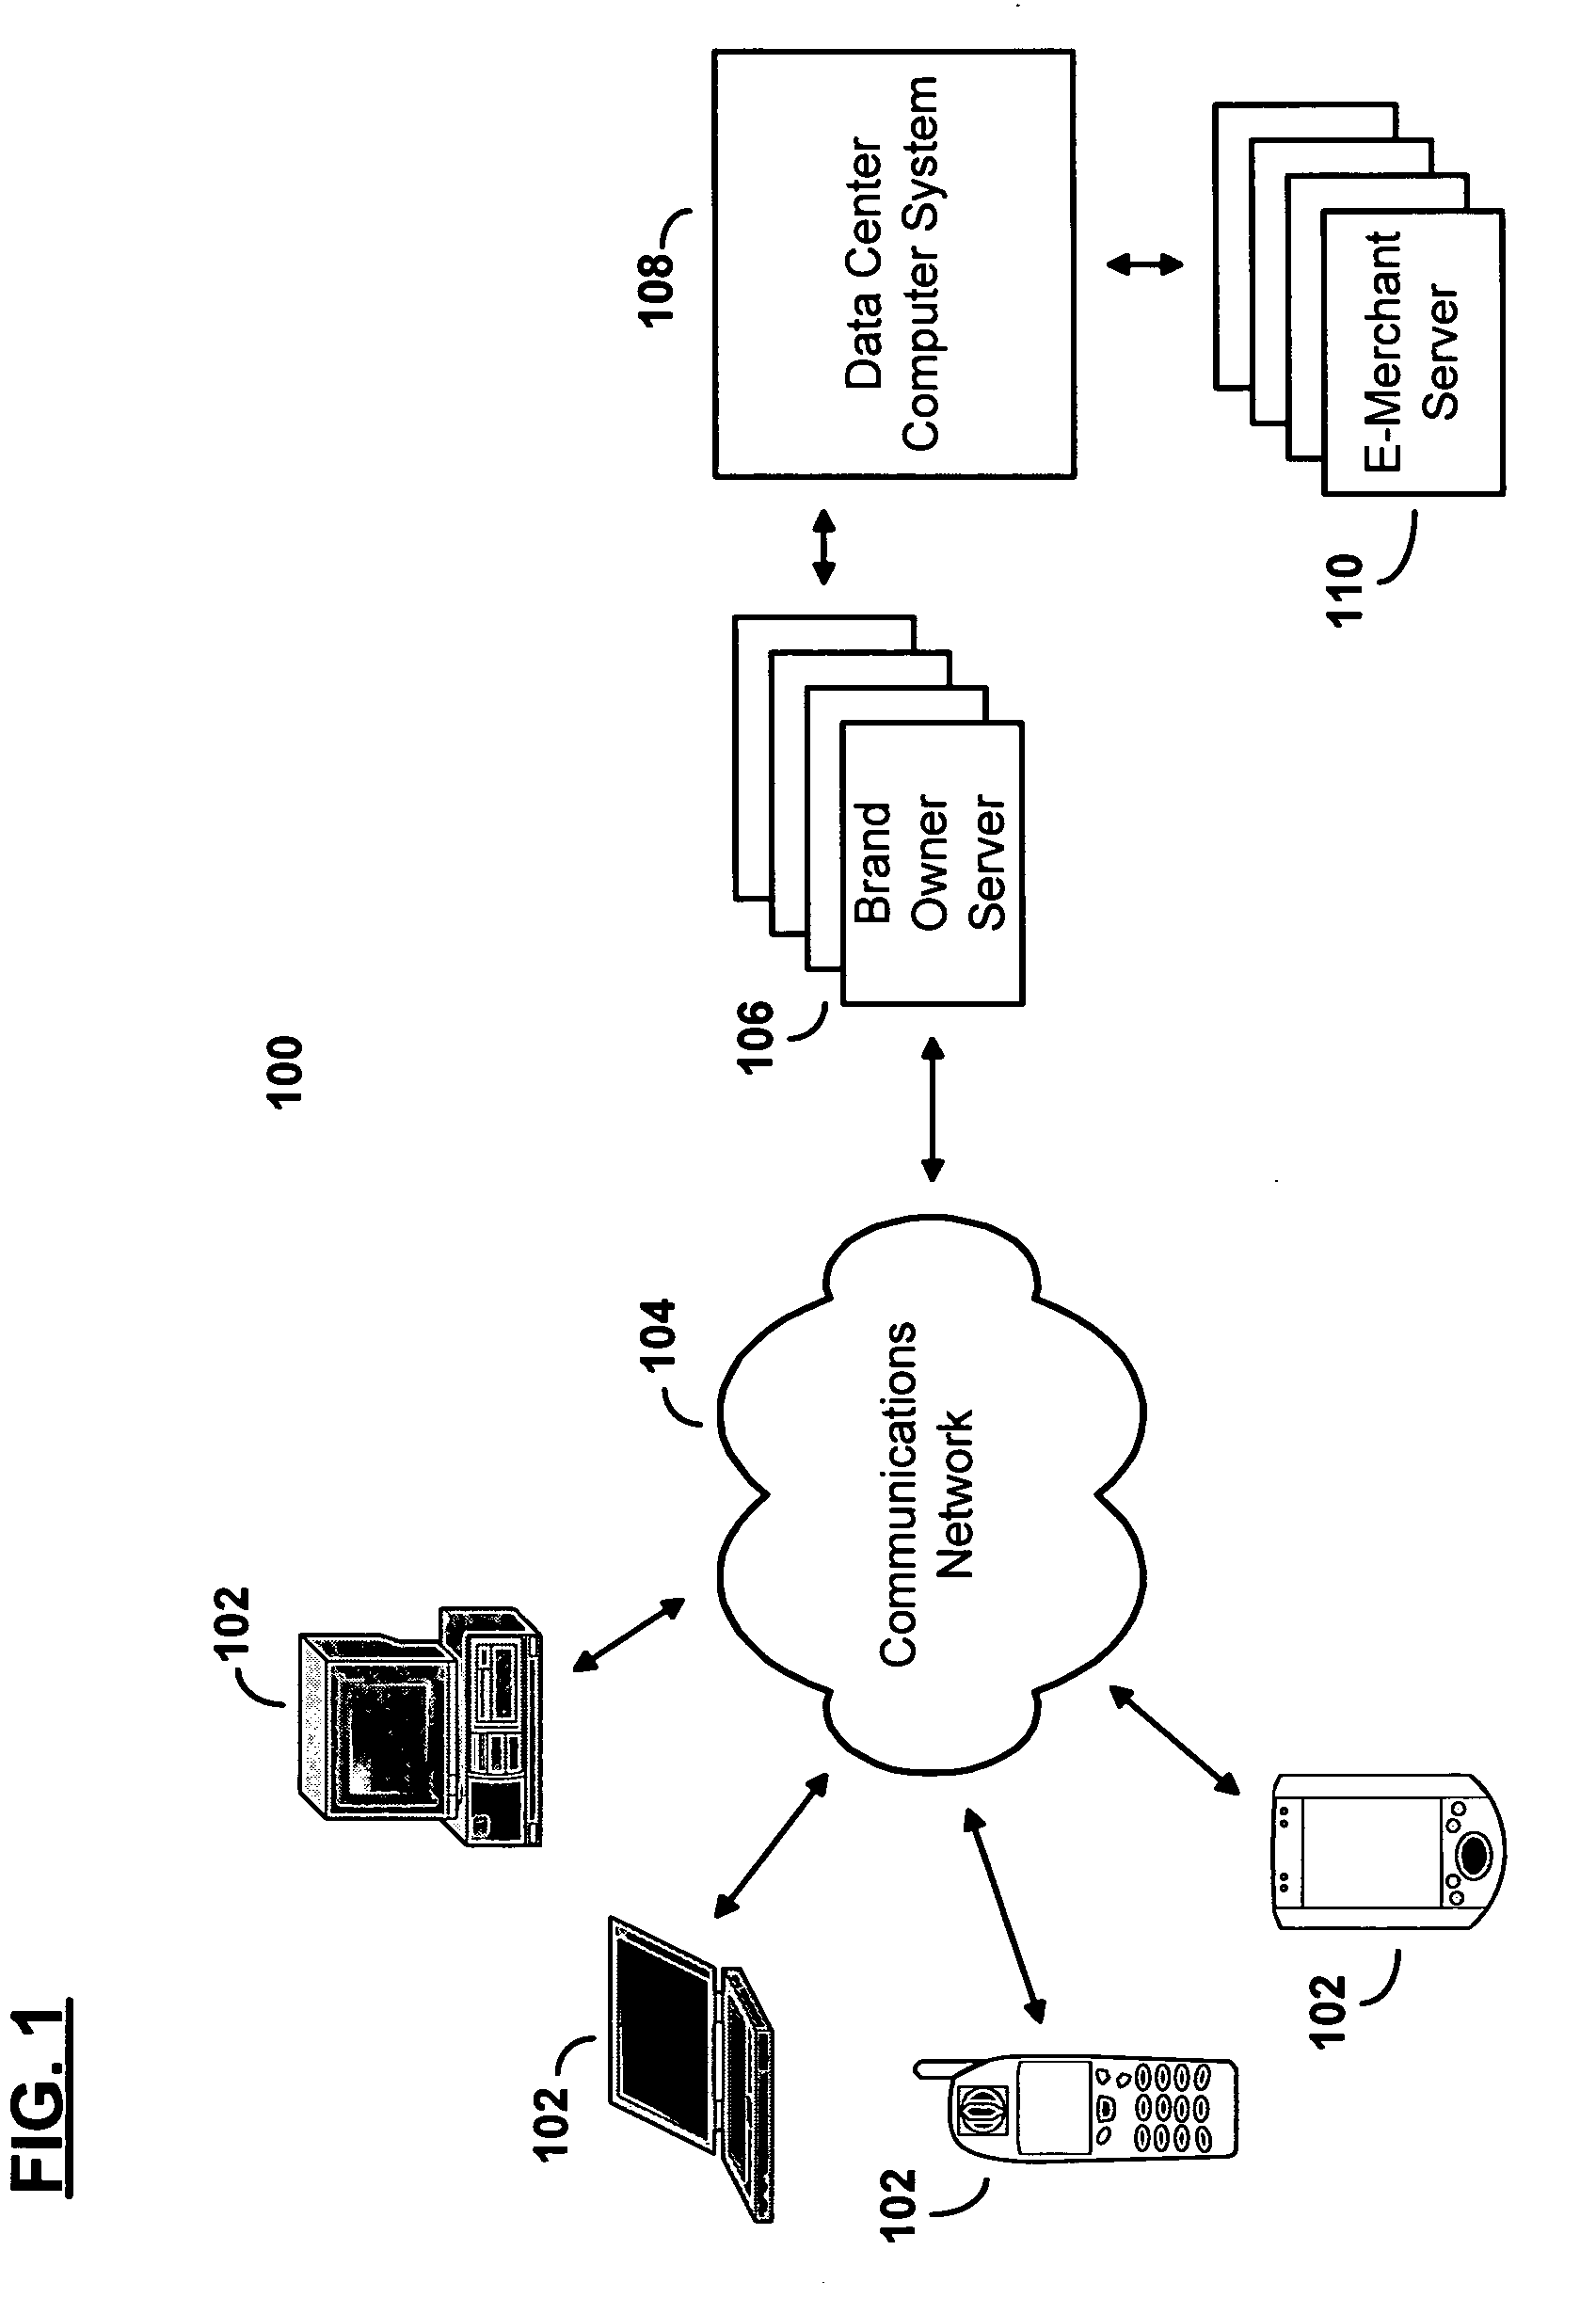 System and method for providing selective content in an electronic commerce environment